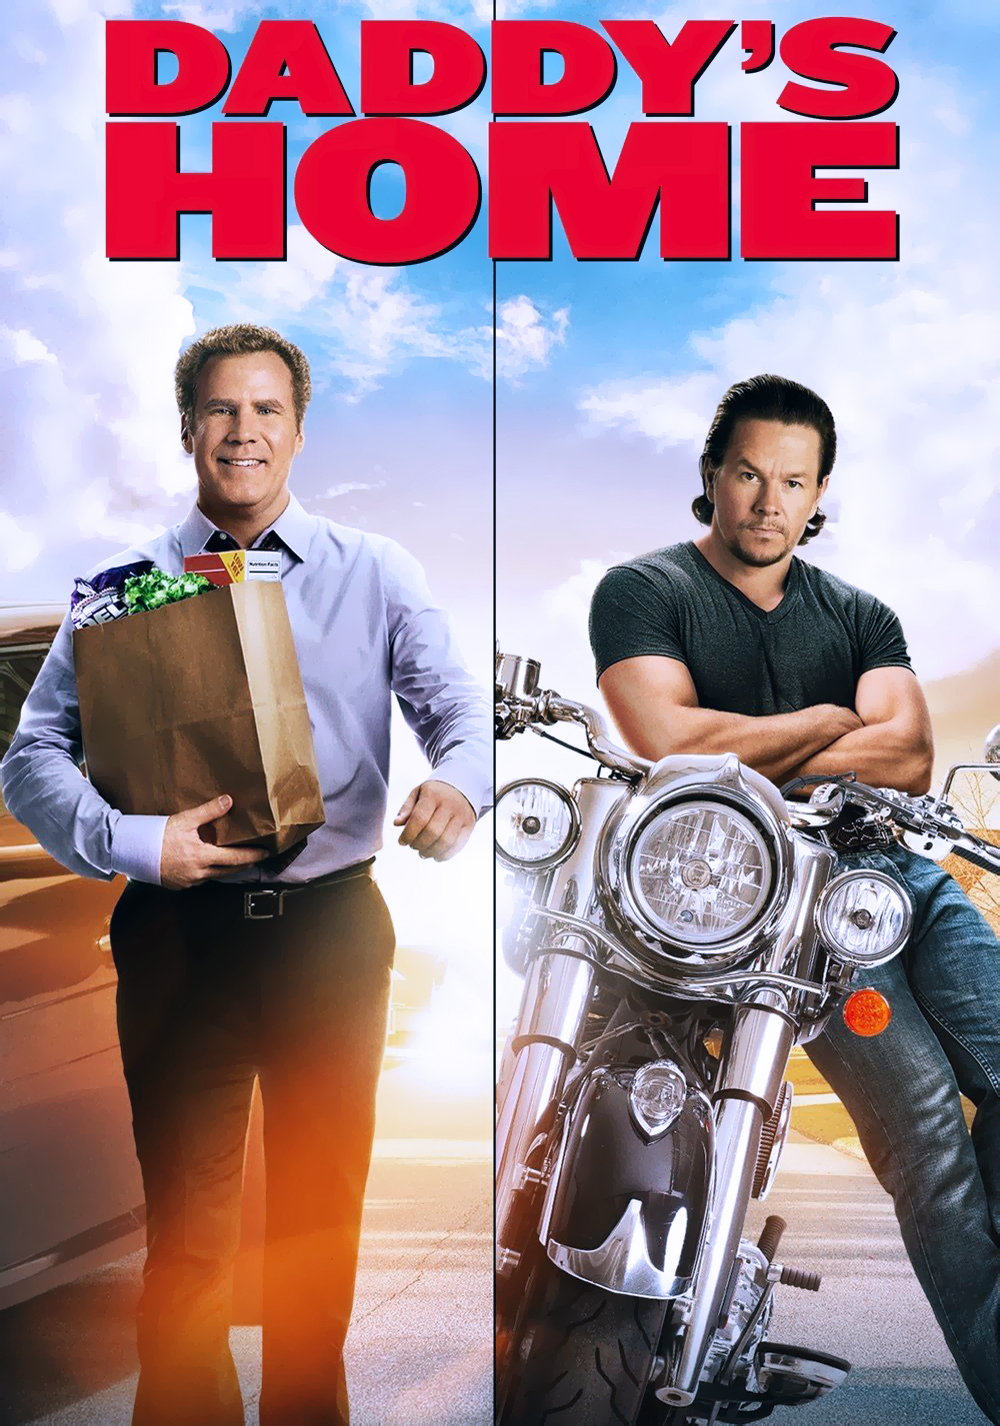 Daddys Home 2 Poster Wallpapers